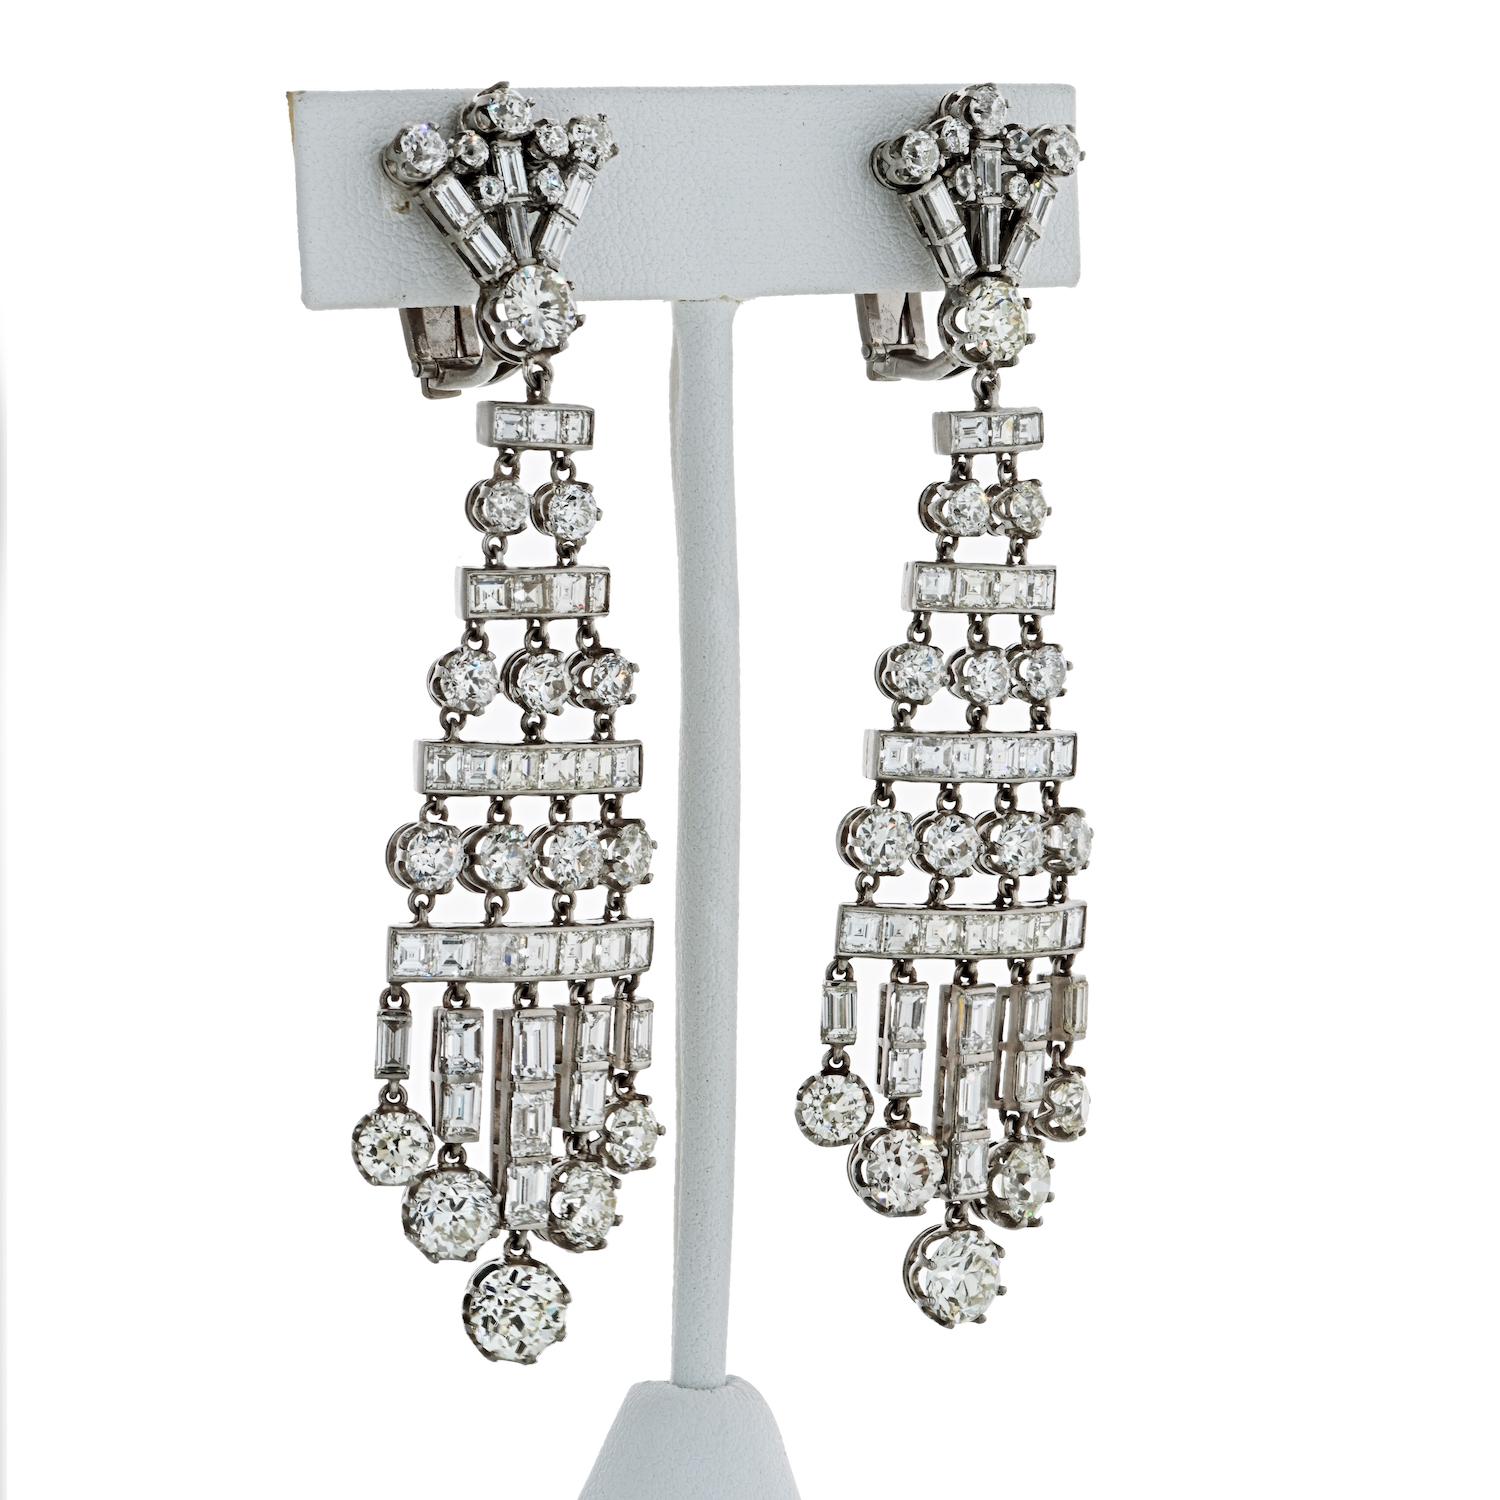 A magnificent pair of 27-carat diamond chandelier earrings. The earrings are comprised of old cut and baguette-shaped diamonds weighing approximately 27.50 carats. The diamonds are G-H color and VS-SI clarity . These dramatic earrings exemplify the